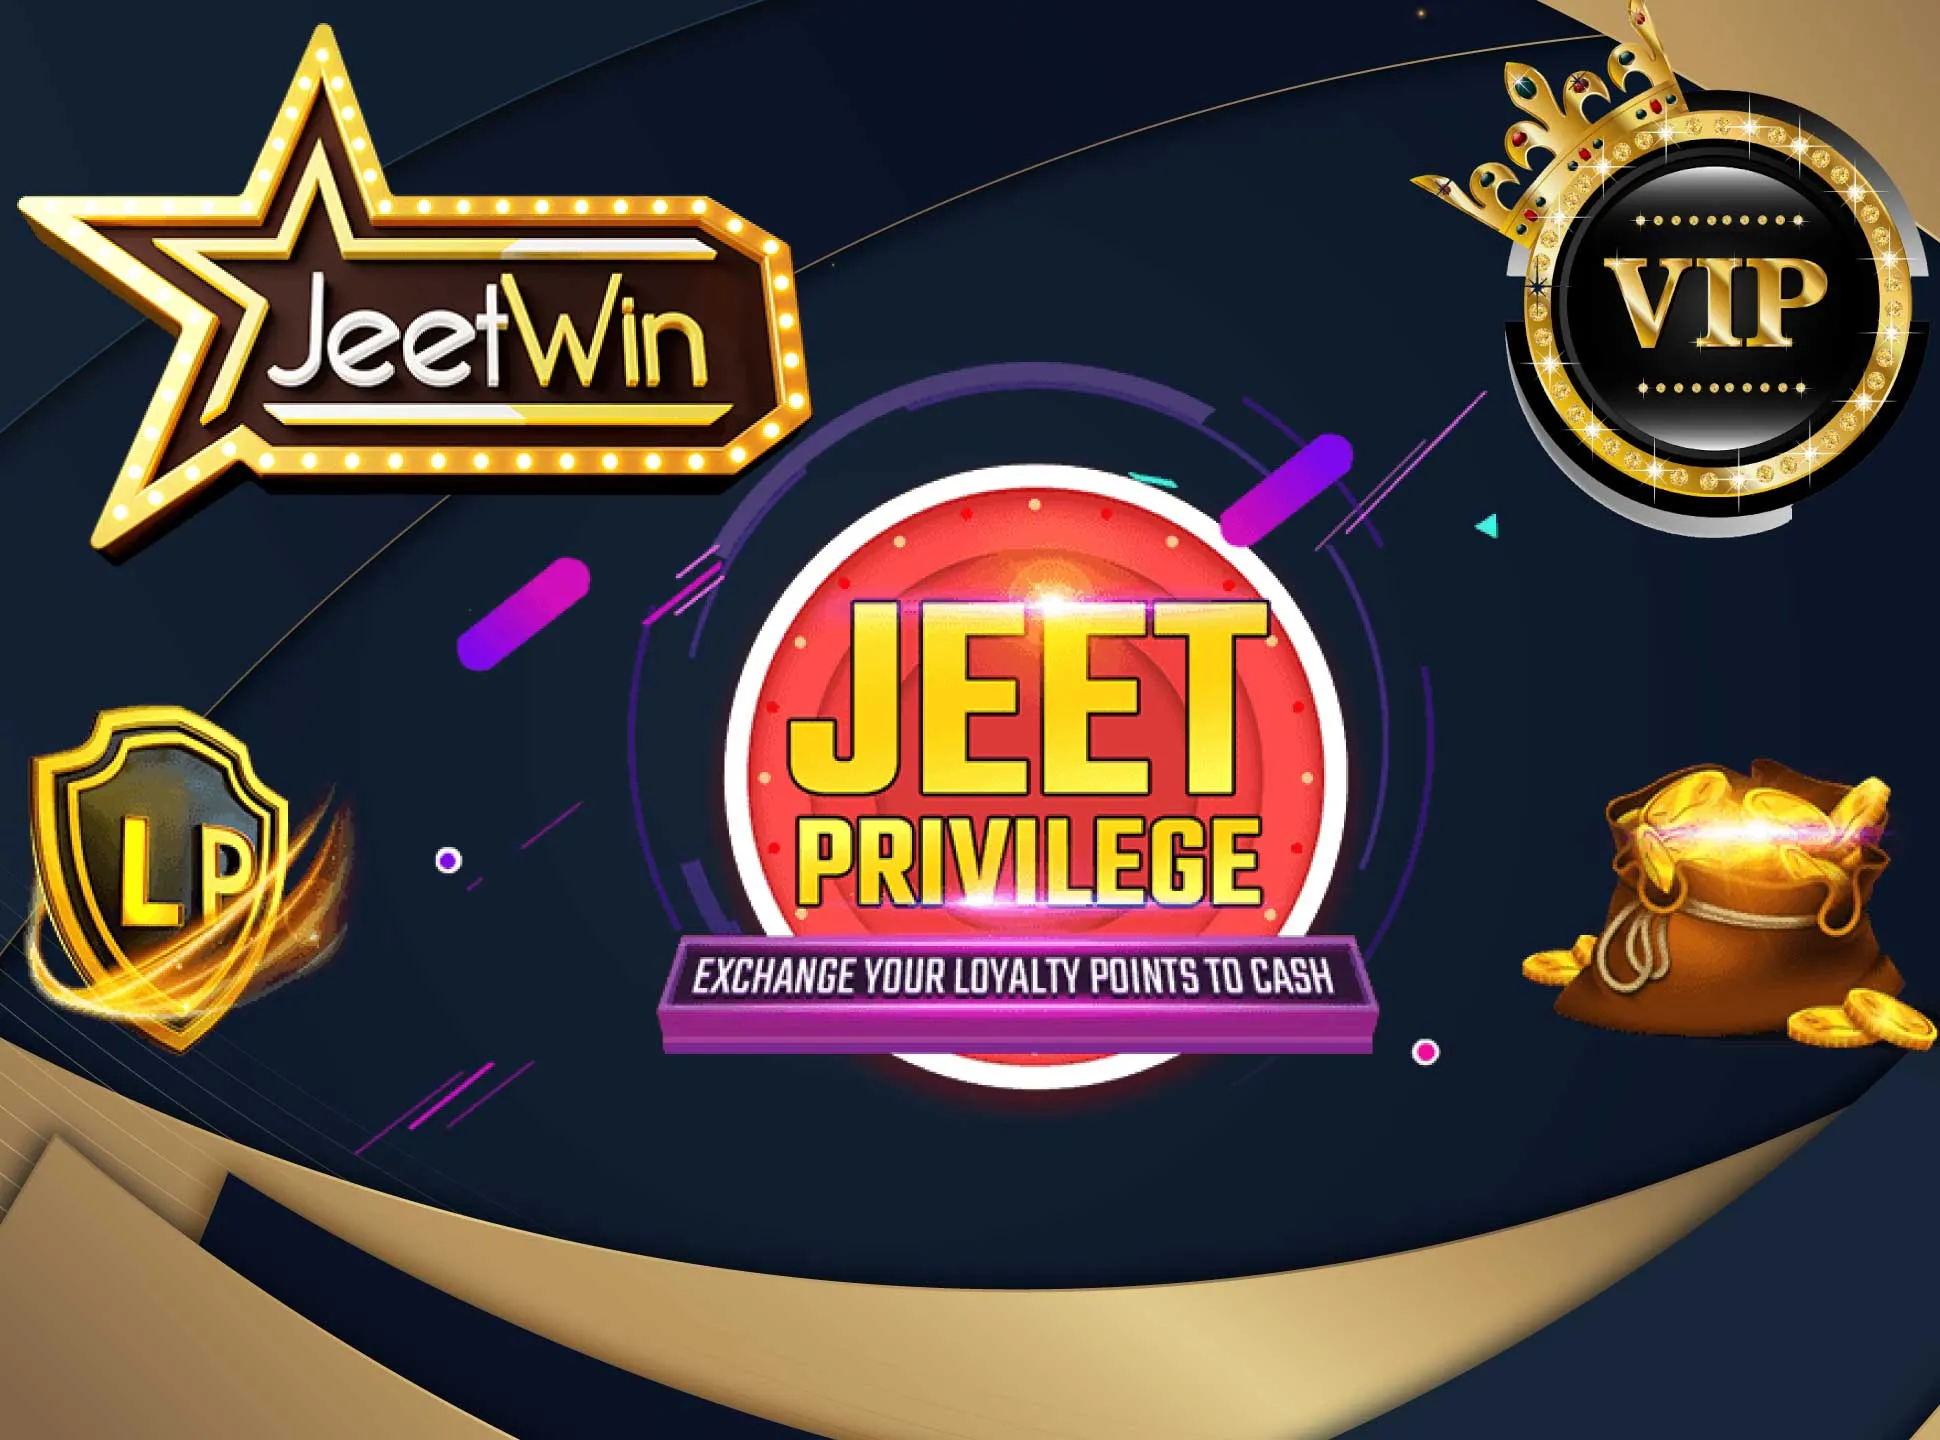 Join the Jeetwin VIP program to get more benefits.